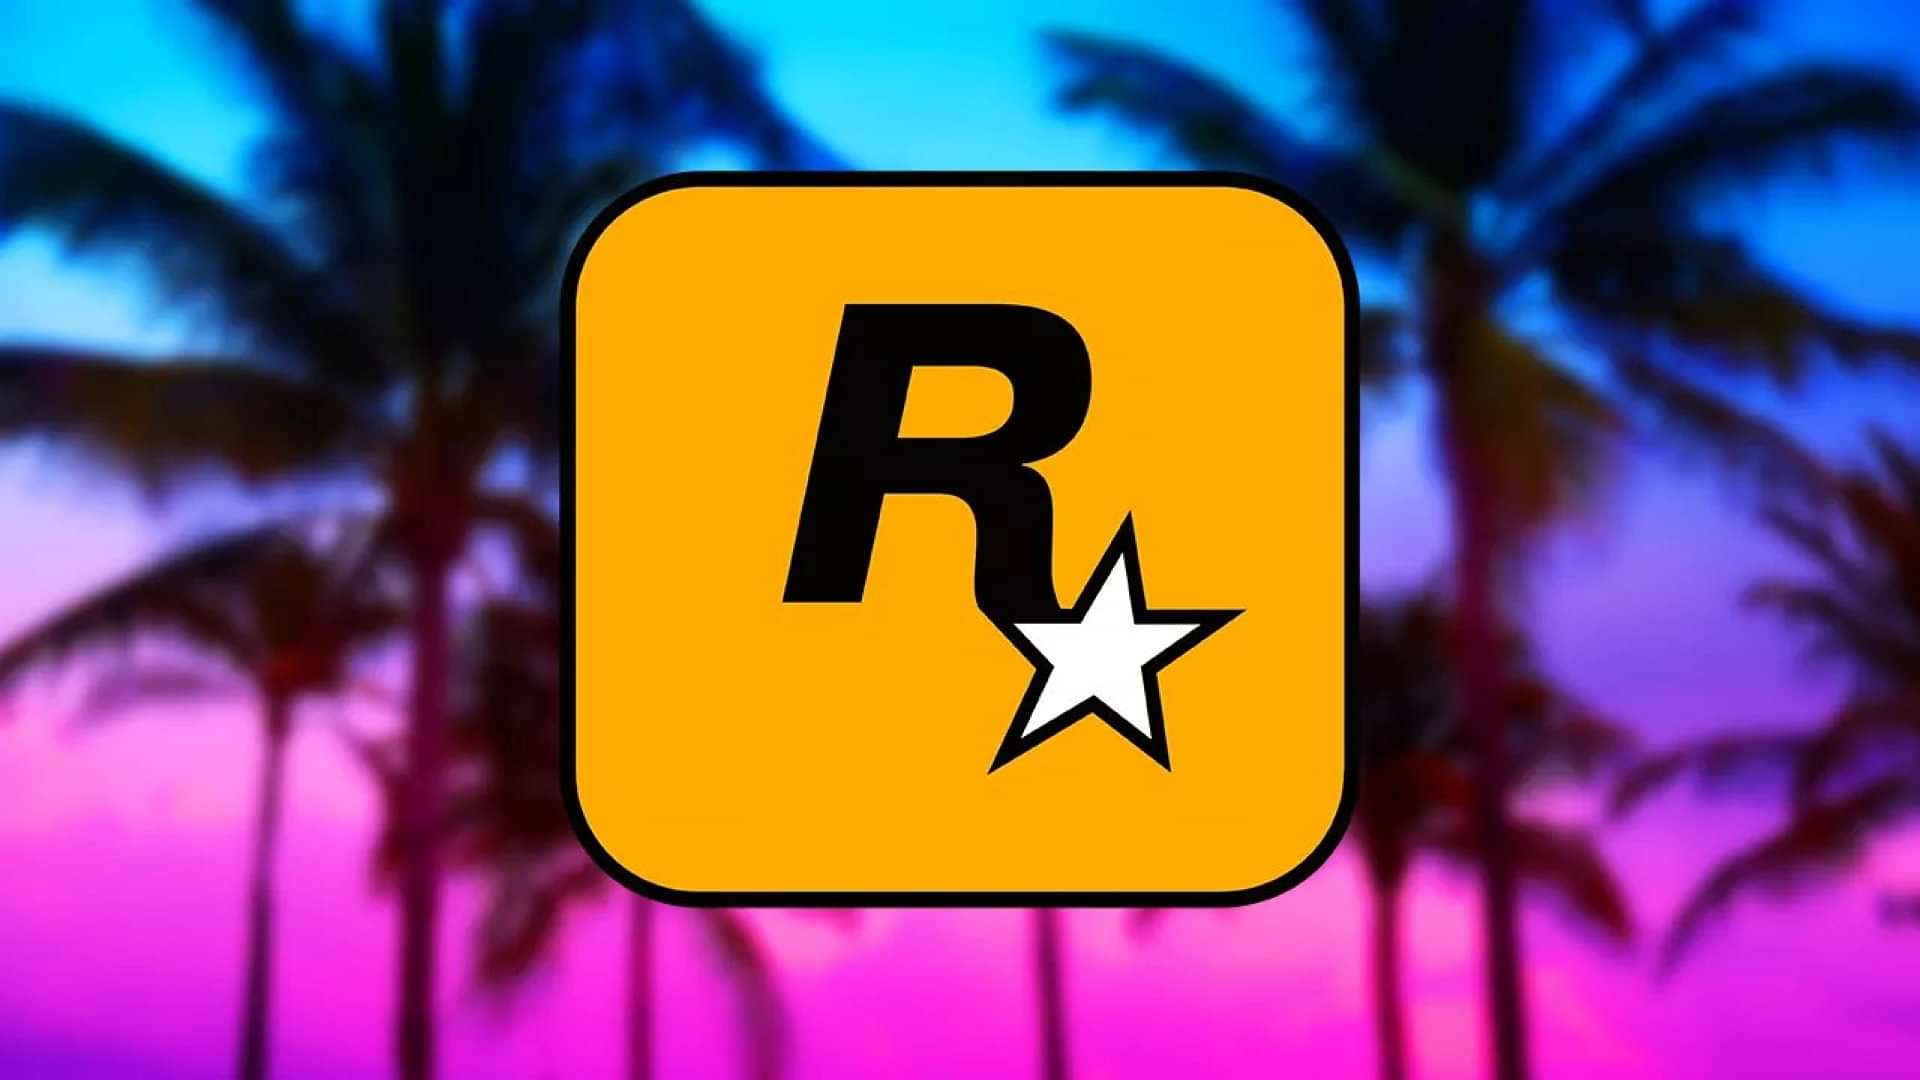 Rockstar Games leak: source code and many game videos published after hack  – Born's Tech and Windows World